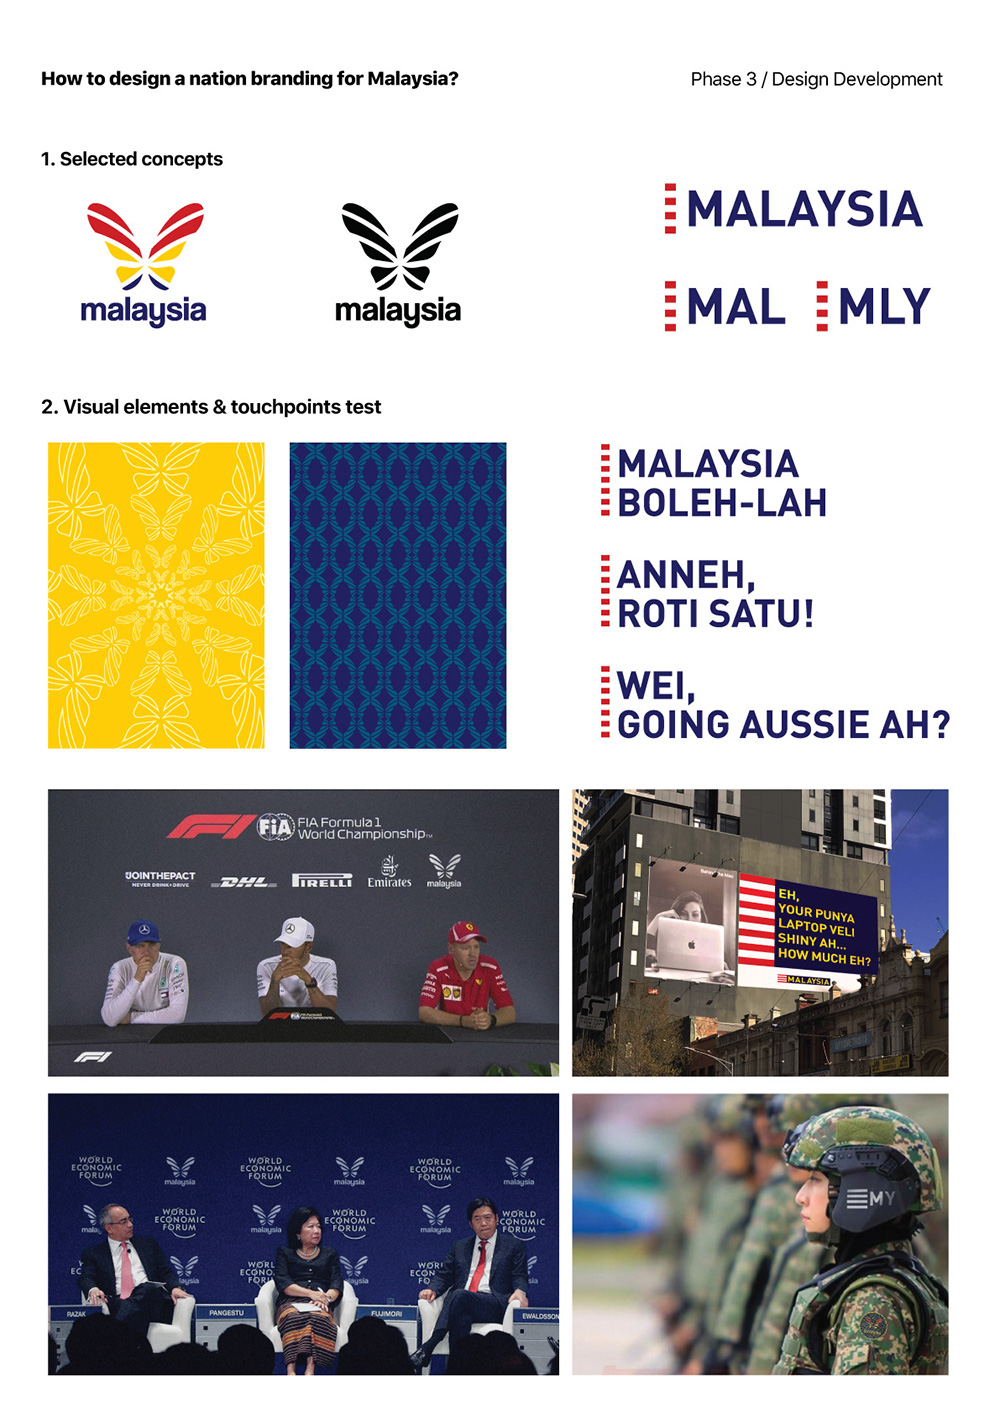 In this phase, I took 2 of 3 potential designs, which are the butterfly & logotype. The reason of selecting those potential designs are because of:

The butterfly:

Malaysia as a multiracial country, identify and applies its national representation in most of the official branding. Most Malaysia national representation uses the Bunga Raya (hibiscus) and Malaya Tiger to show the unity of Malaysia and the strength of the country.Representation needs to reflect the idea of transformation, growth and a new beginning. Thus, the Rajah Brooke butterfly is a significant representation to reflect the new beginning of Malaysia.

The language (logotype):

Malaysia is best known for its multiverse languages as we are living in a multicultural country. And being Malaysian, conversing in Manglish is what makes us united as a nation and a unique country. What if we embrace Manglish and bring it to the next step?

With the rationale, I further developed those direction and applied to selected touchpoints to better communicate the national brand locally & international.